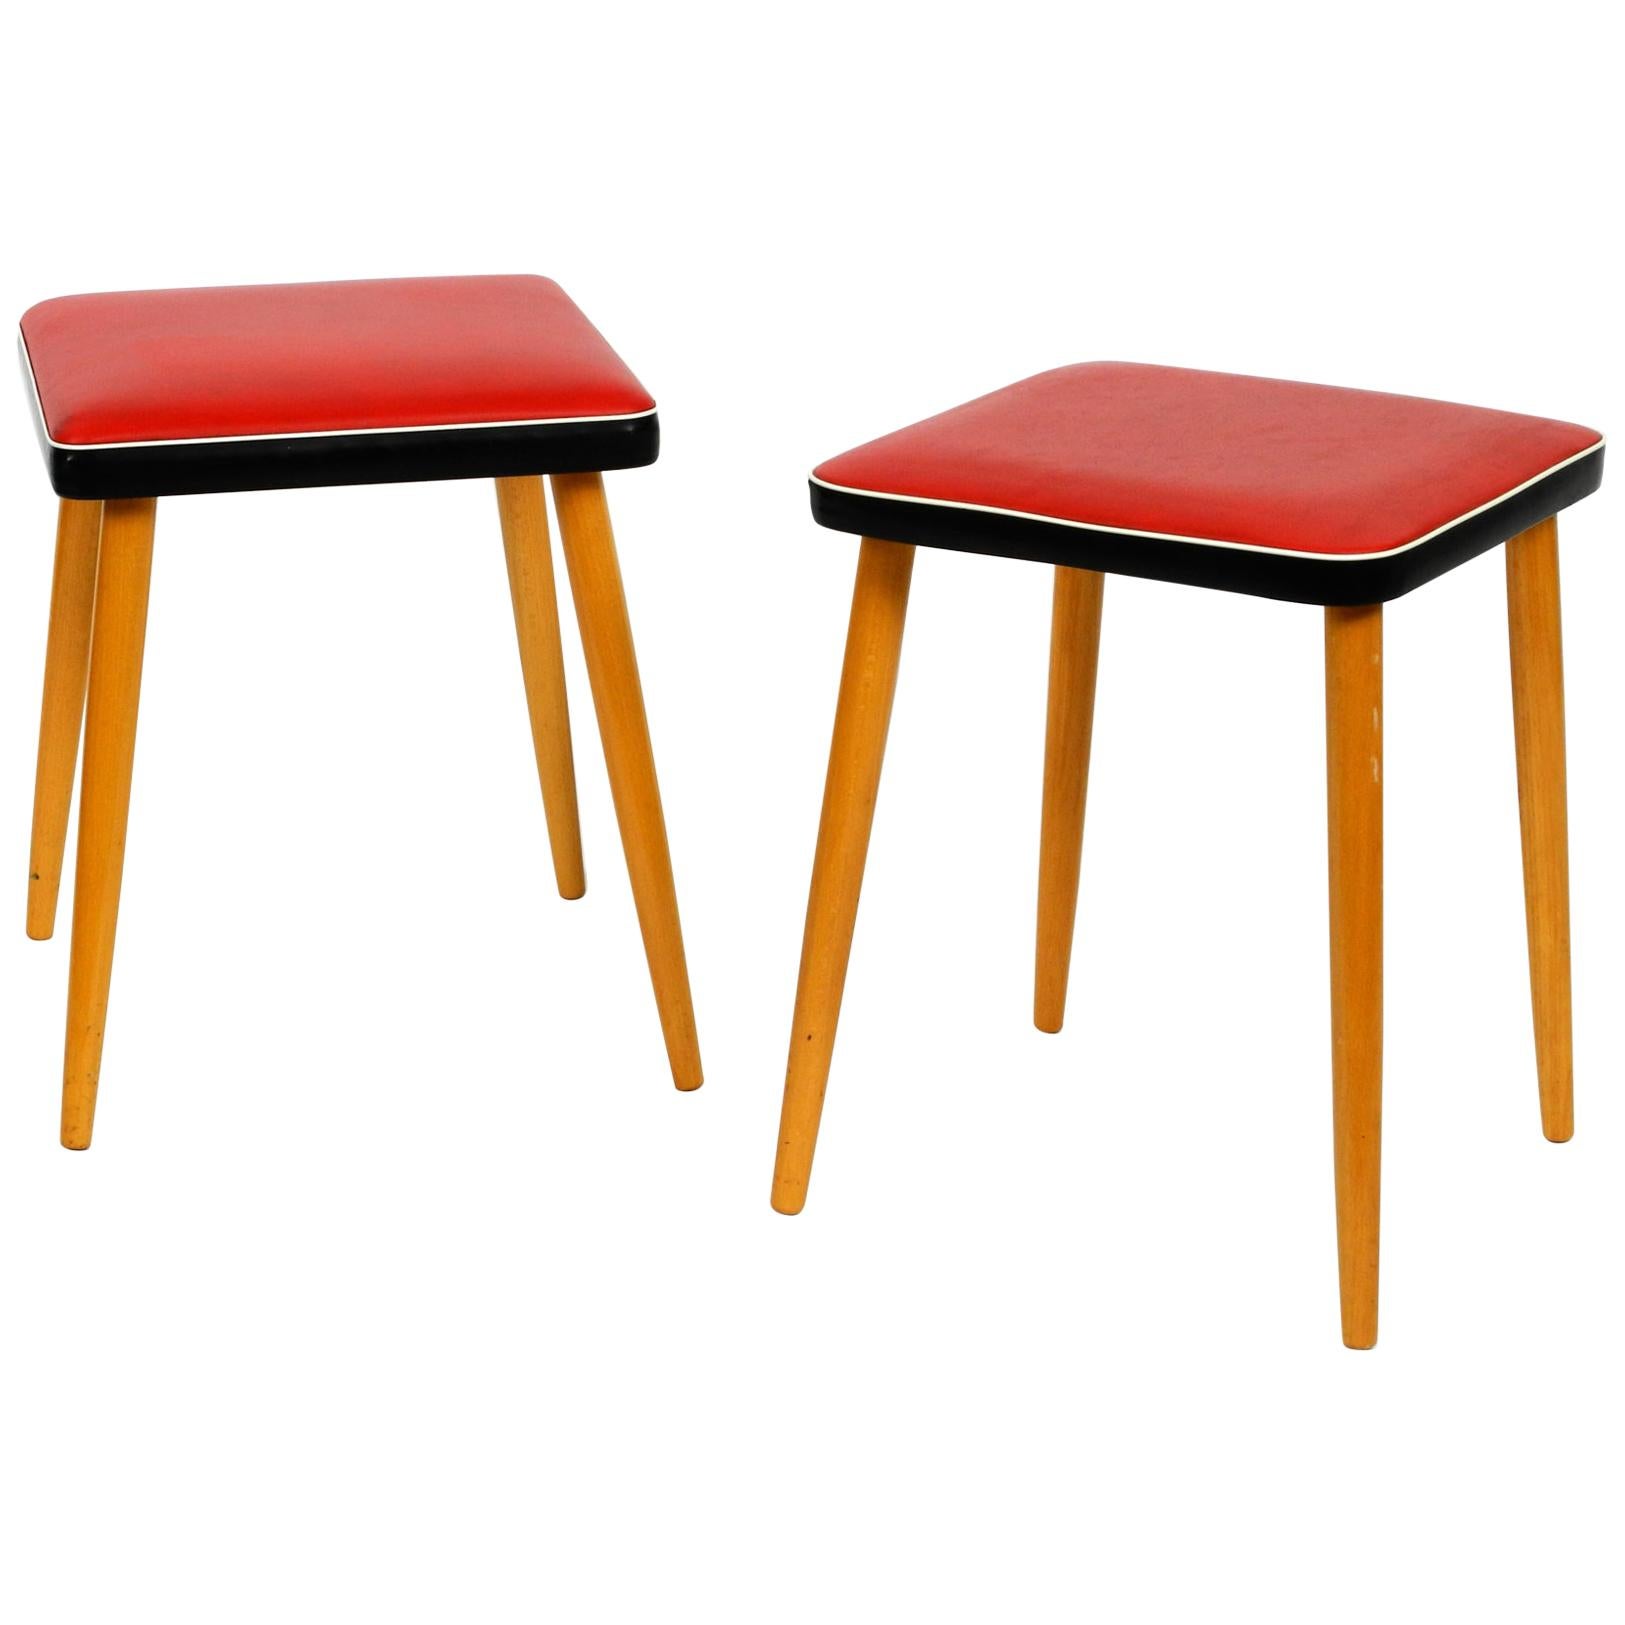 Pair of Almost Mint Midcentury Wooden Stools with Red Faux Leather Cover in Red